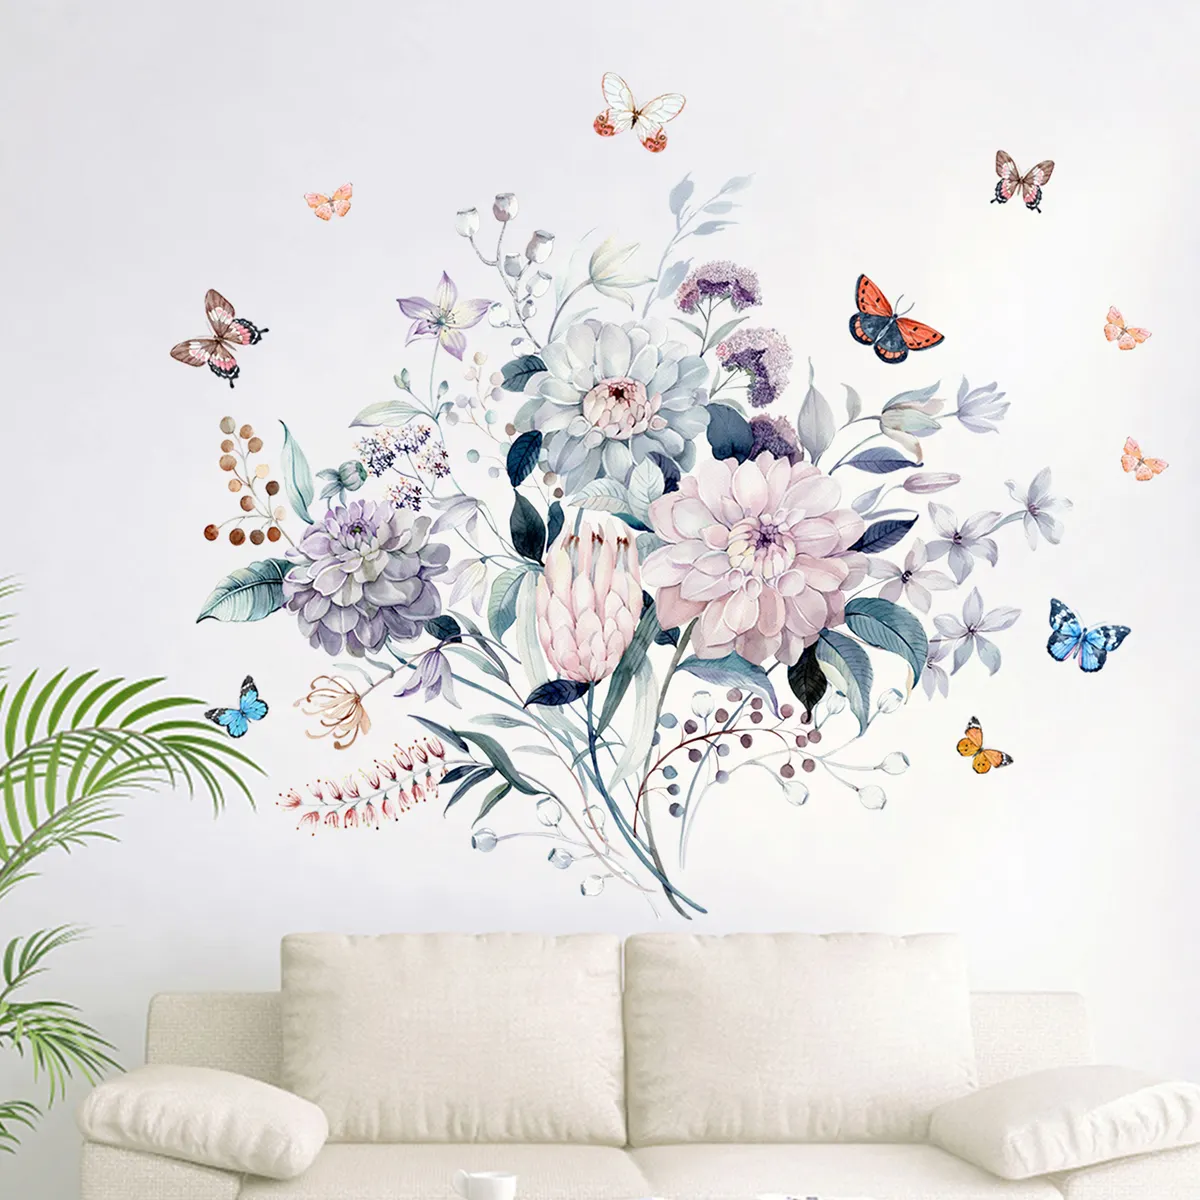 Warm Colors Flowers And Leaves Wall Stickers Camellia Colorful Butterflies Wallpaper For Bedroom Living Room Romantic Home Decor